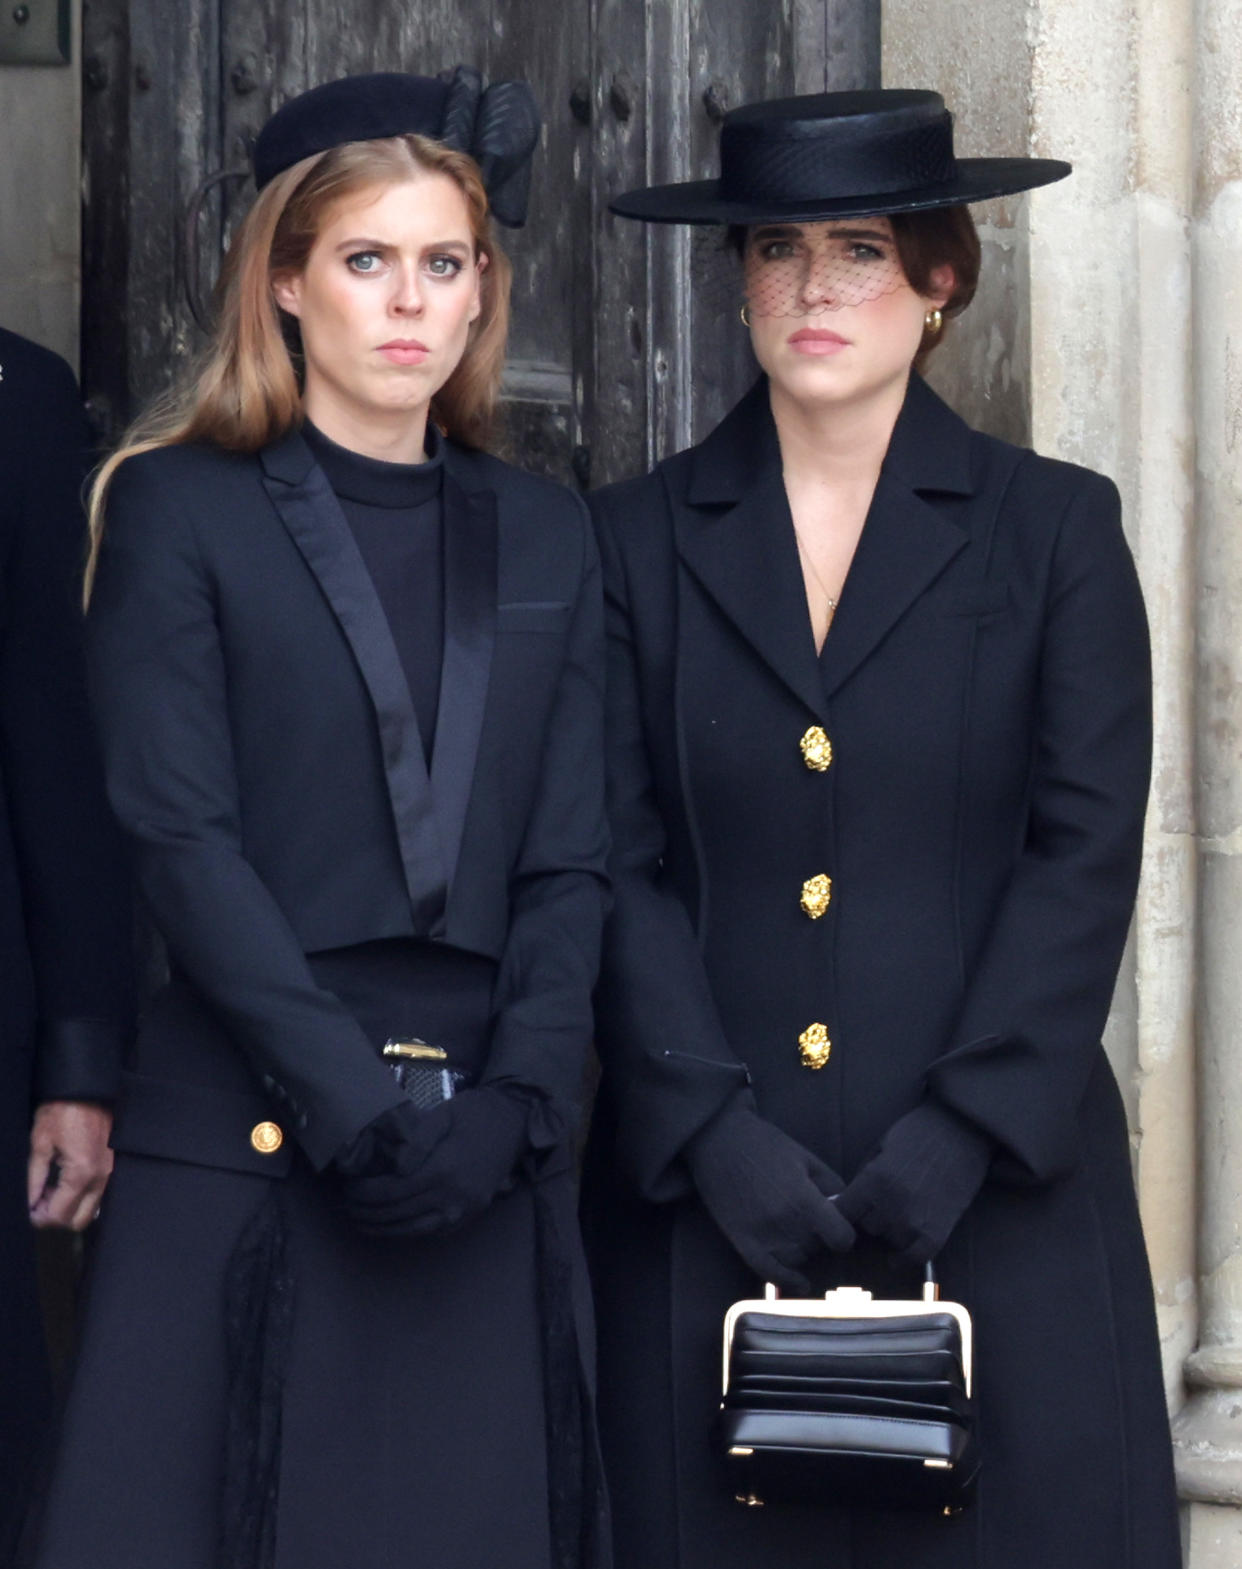 Princess Beatrice Windsor and Princess Eugenie Windsor attend The State Funeral Of Queen Elizabeth II at Westminster Abbey on September 19, 2022 in London, England. Elizabeth Alexandra Mary Windsor was born in Bruton Street, Mayfair, London on 21 April 1926. She married Prince Philip in 1947 and ascended the throne of the United Kingdom and Commonwealth on 6 February 1952 after the death of her Father, King George VI. Queen Elizabeth II died at Balmoral Castle in Scotland on September 8, 2022, and is succeeded by her eldest son, King Charles III. (Photo by Chris Jackson/Getty Images)